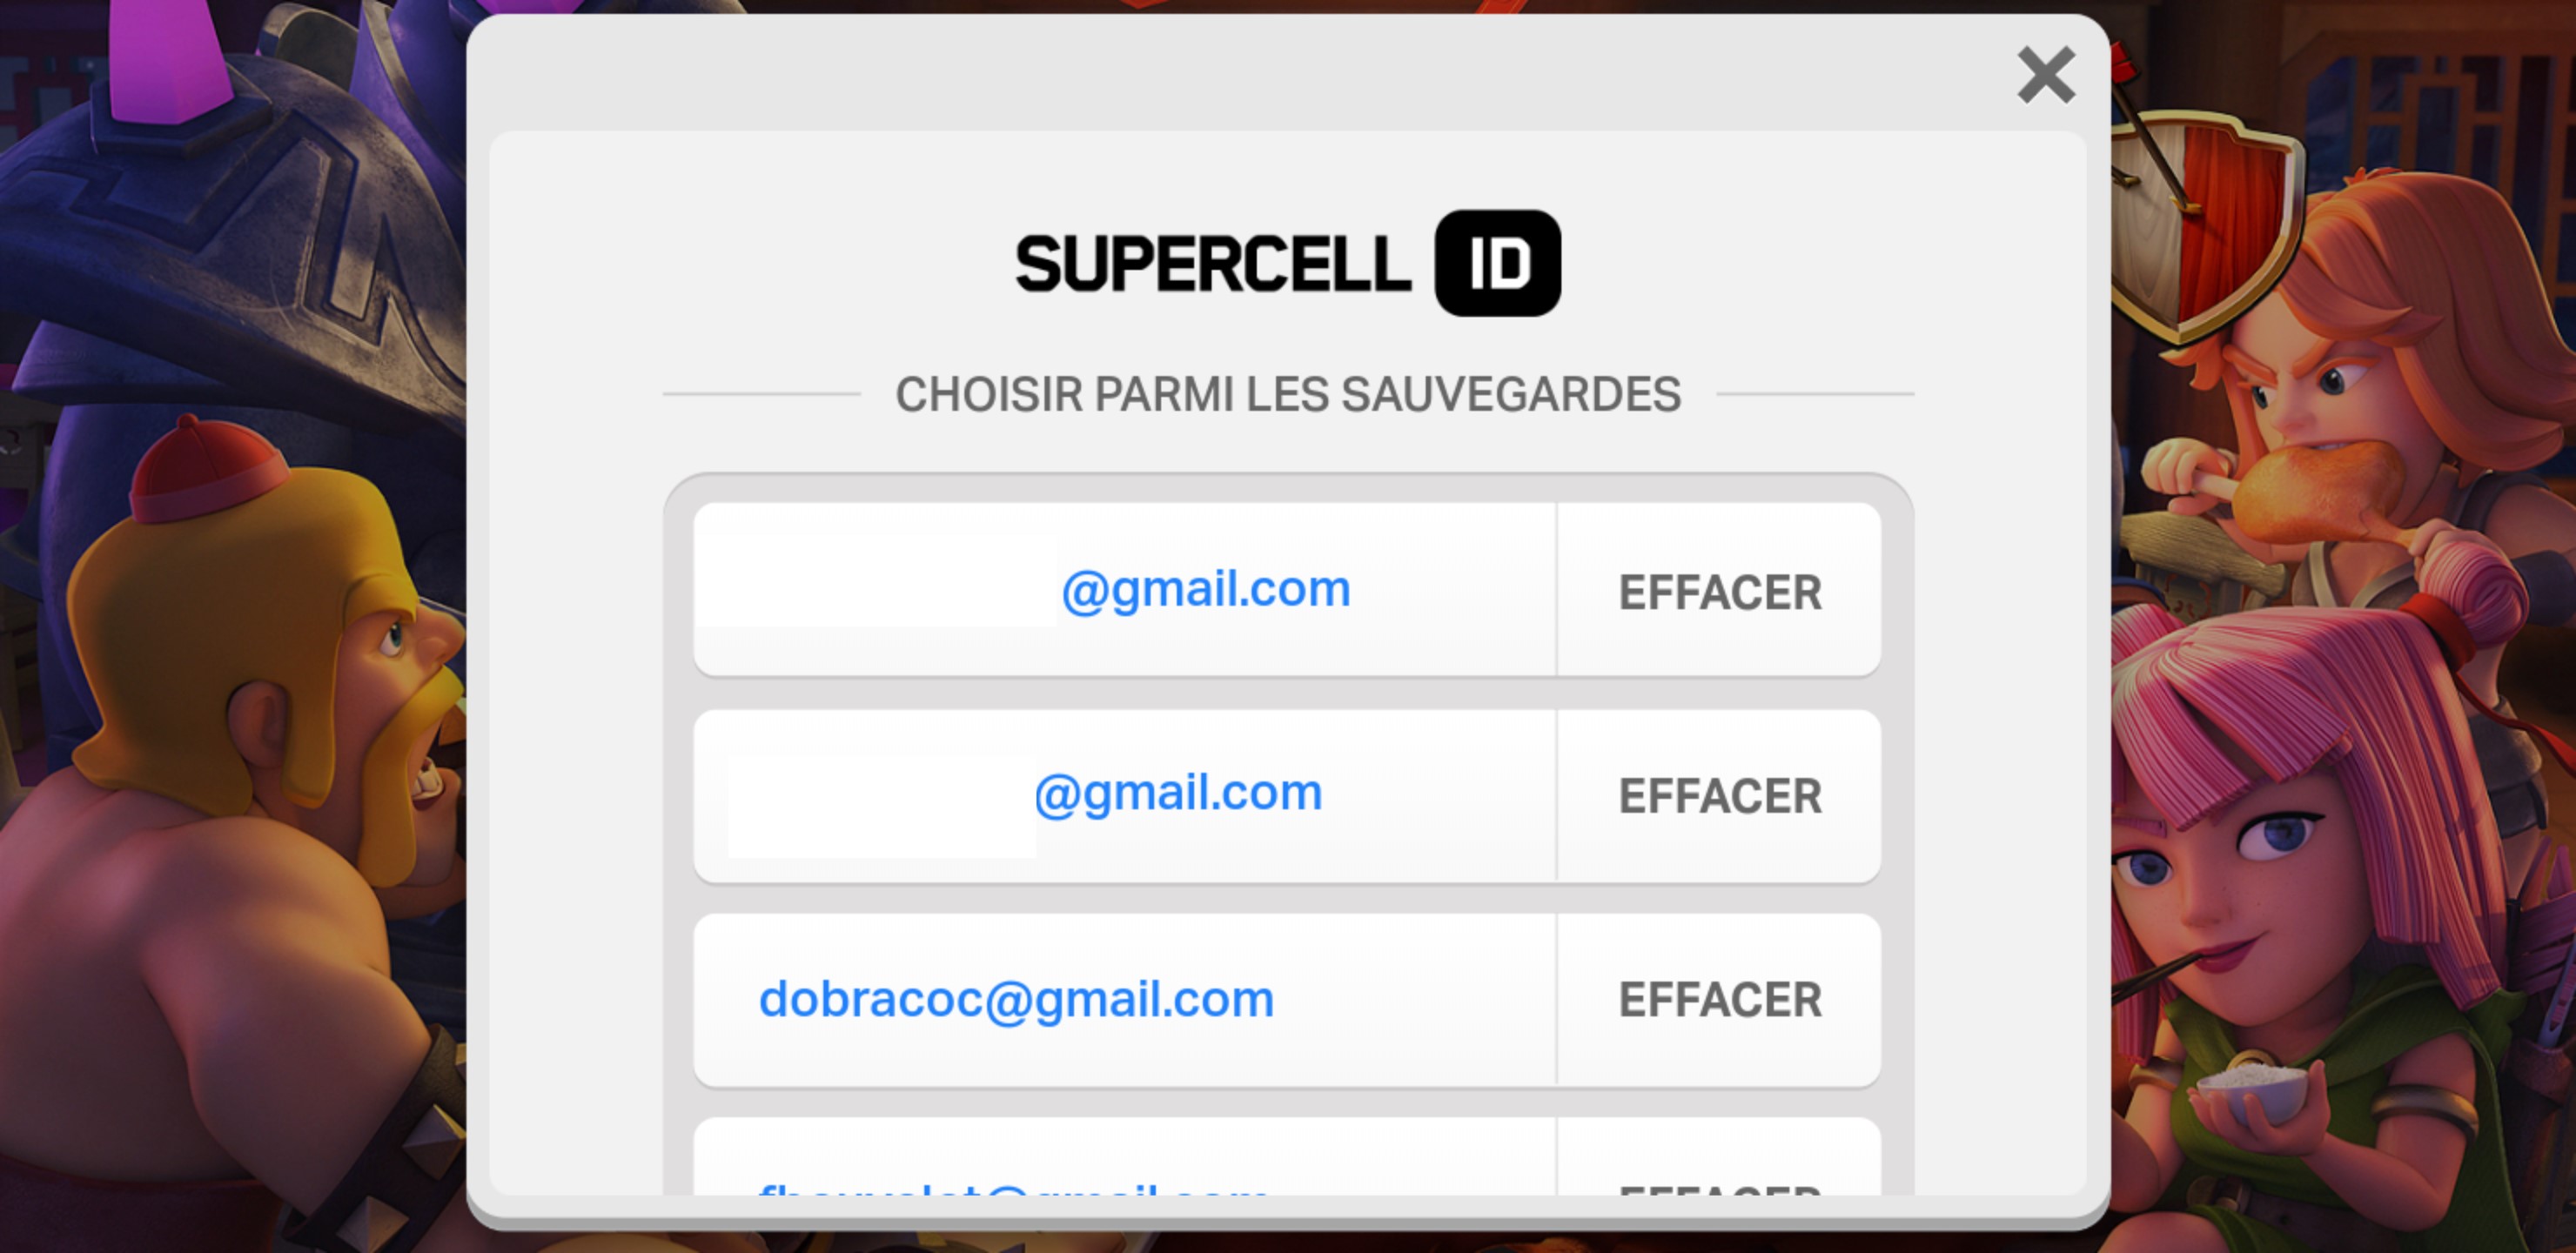 Supercell Id Sauvergarder Un Ou Plusieurs Comptes Clash Of Clans France - brawl stars compte supercell id